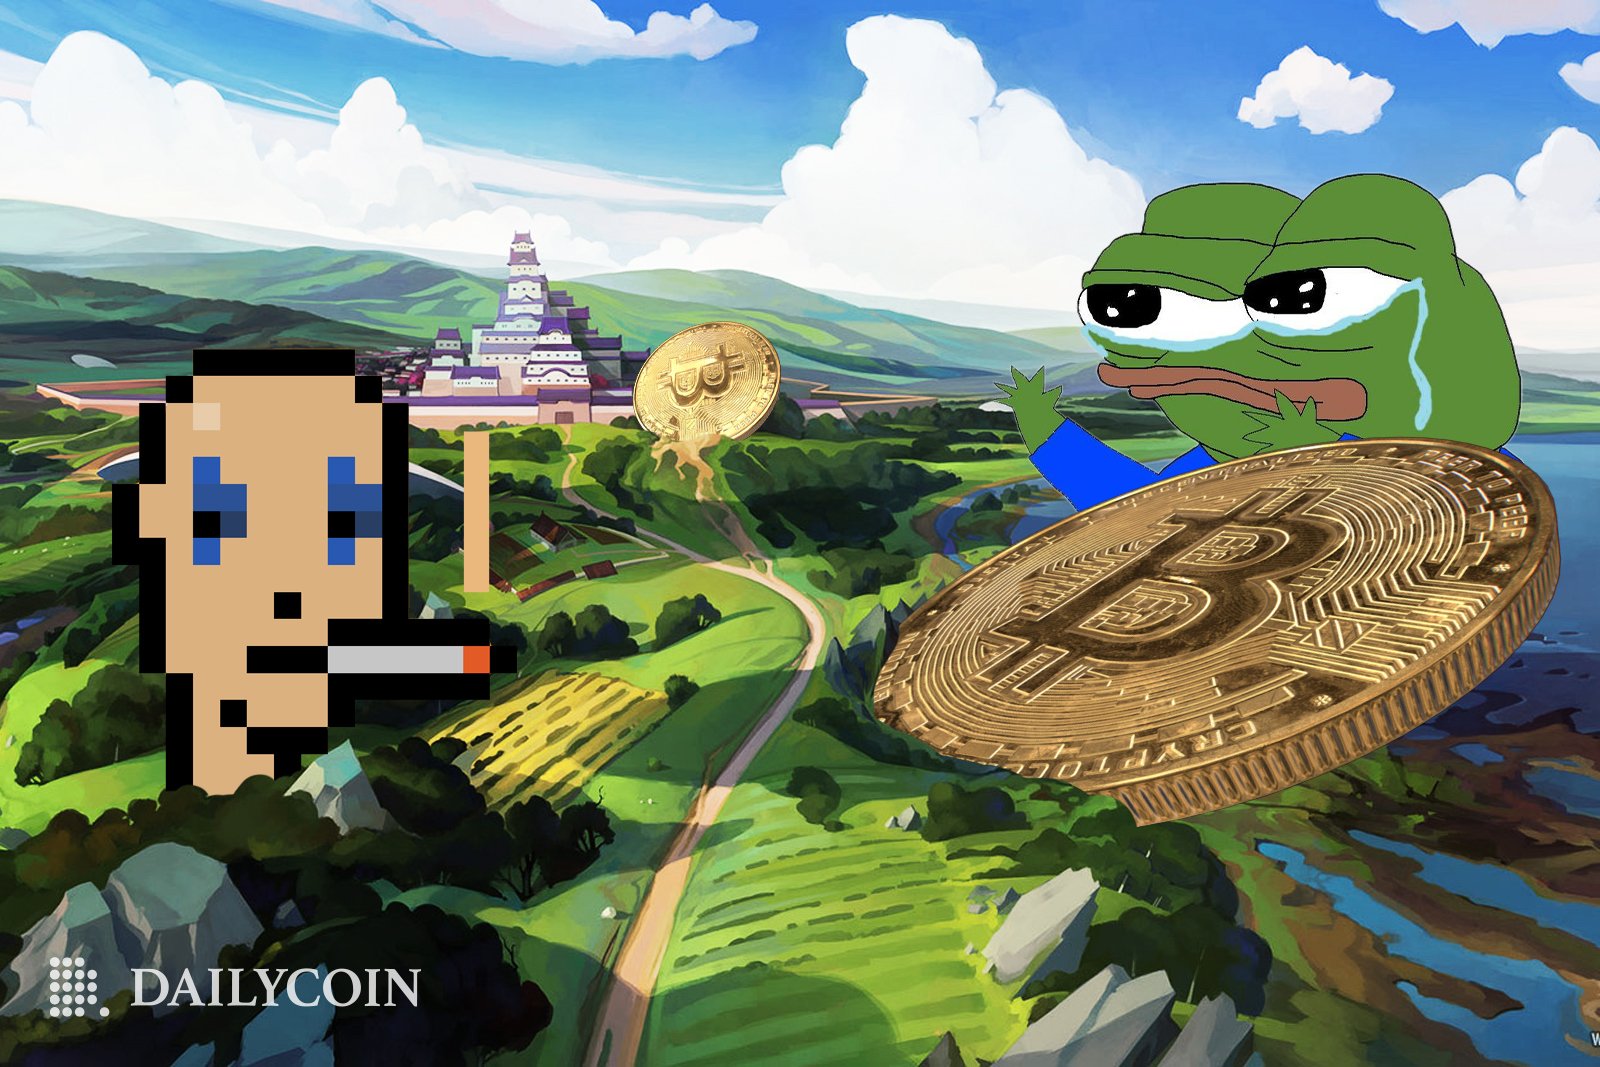 Crypto Punk and crying pepe in the crypto countryside